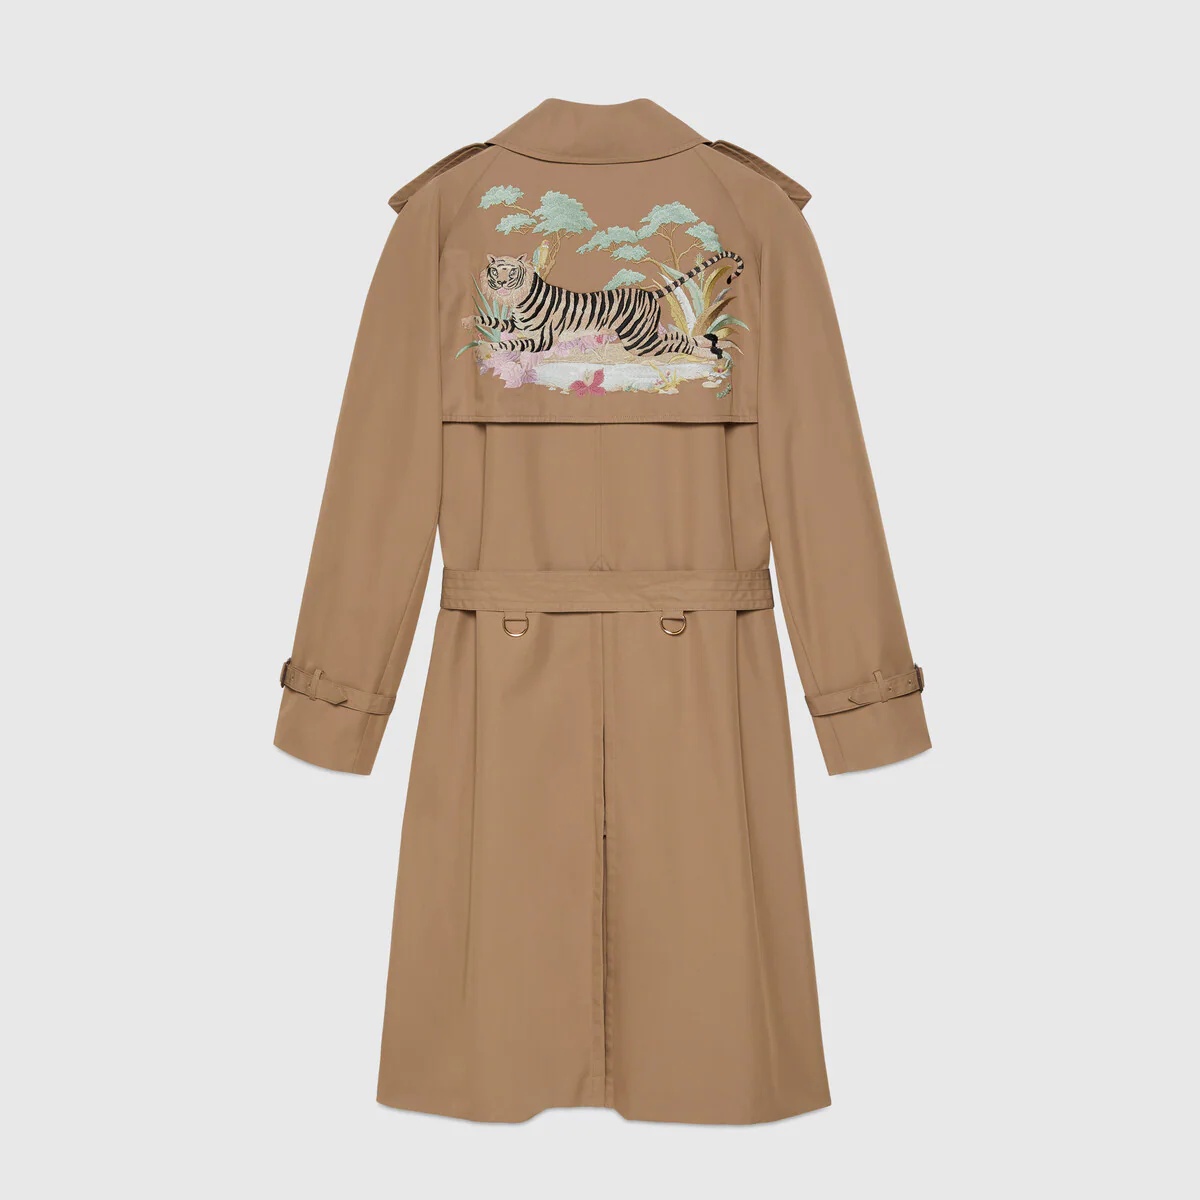 Gucci Tiger embroidered coat - 4